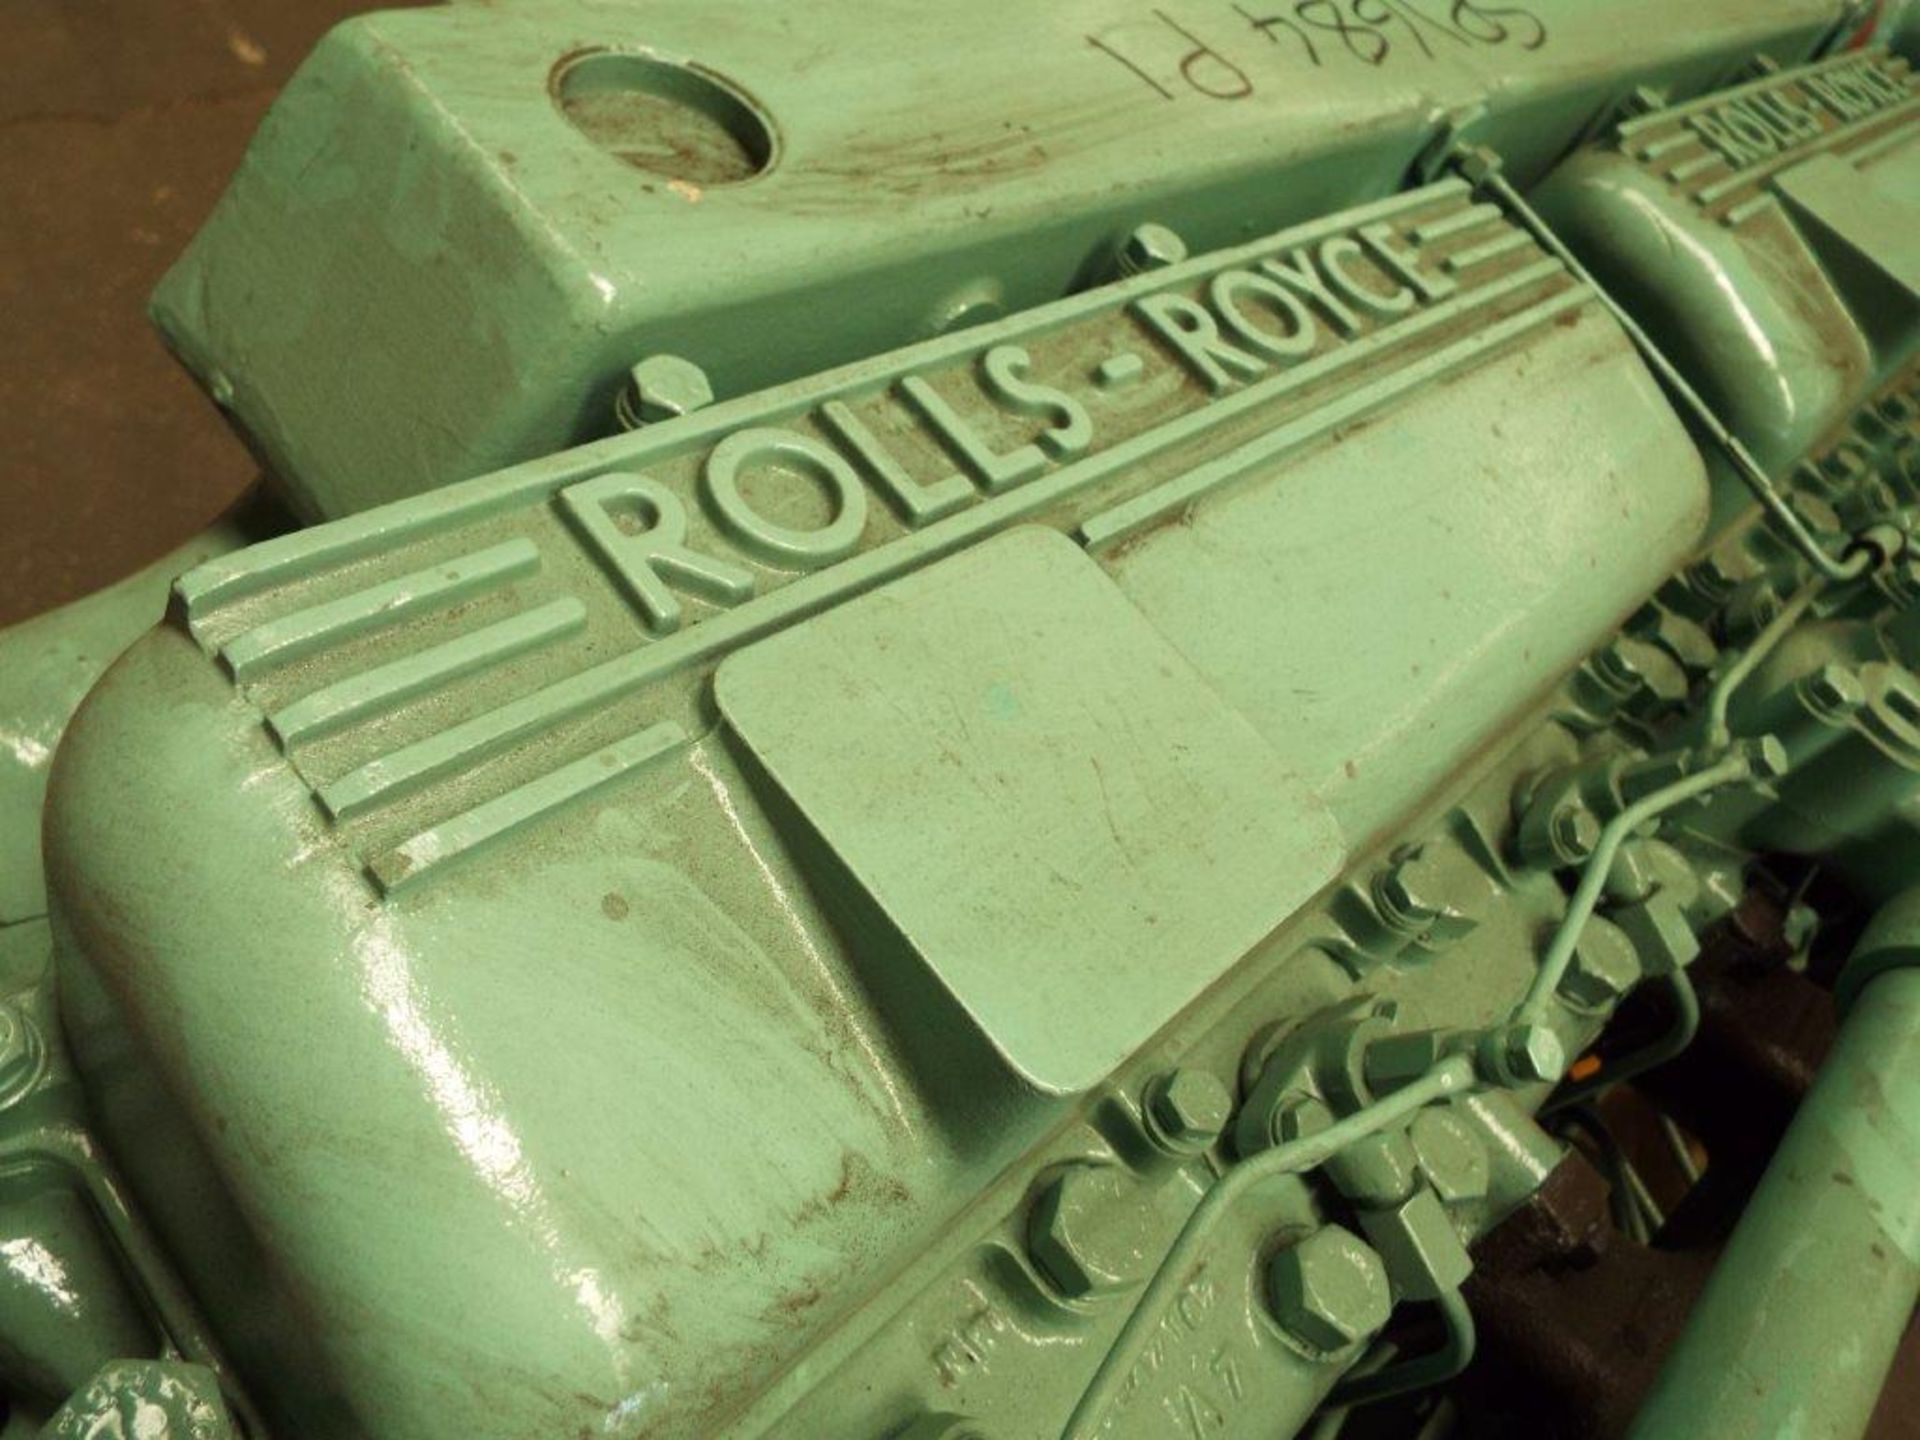 A1 Reconditioned Rolls Royce/Perkins 290L Straight 6 Turbo Diesel Engine for Foden Recovery Vehicles - Image 10 of 20